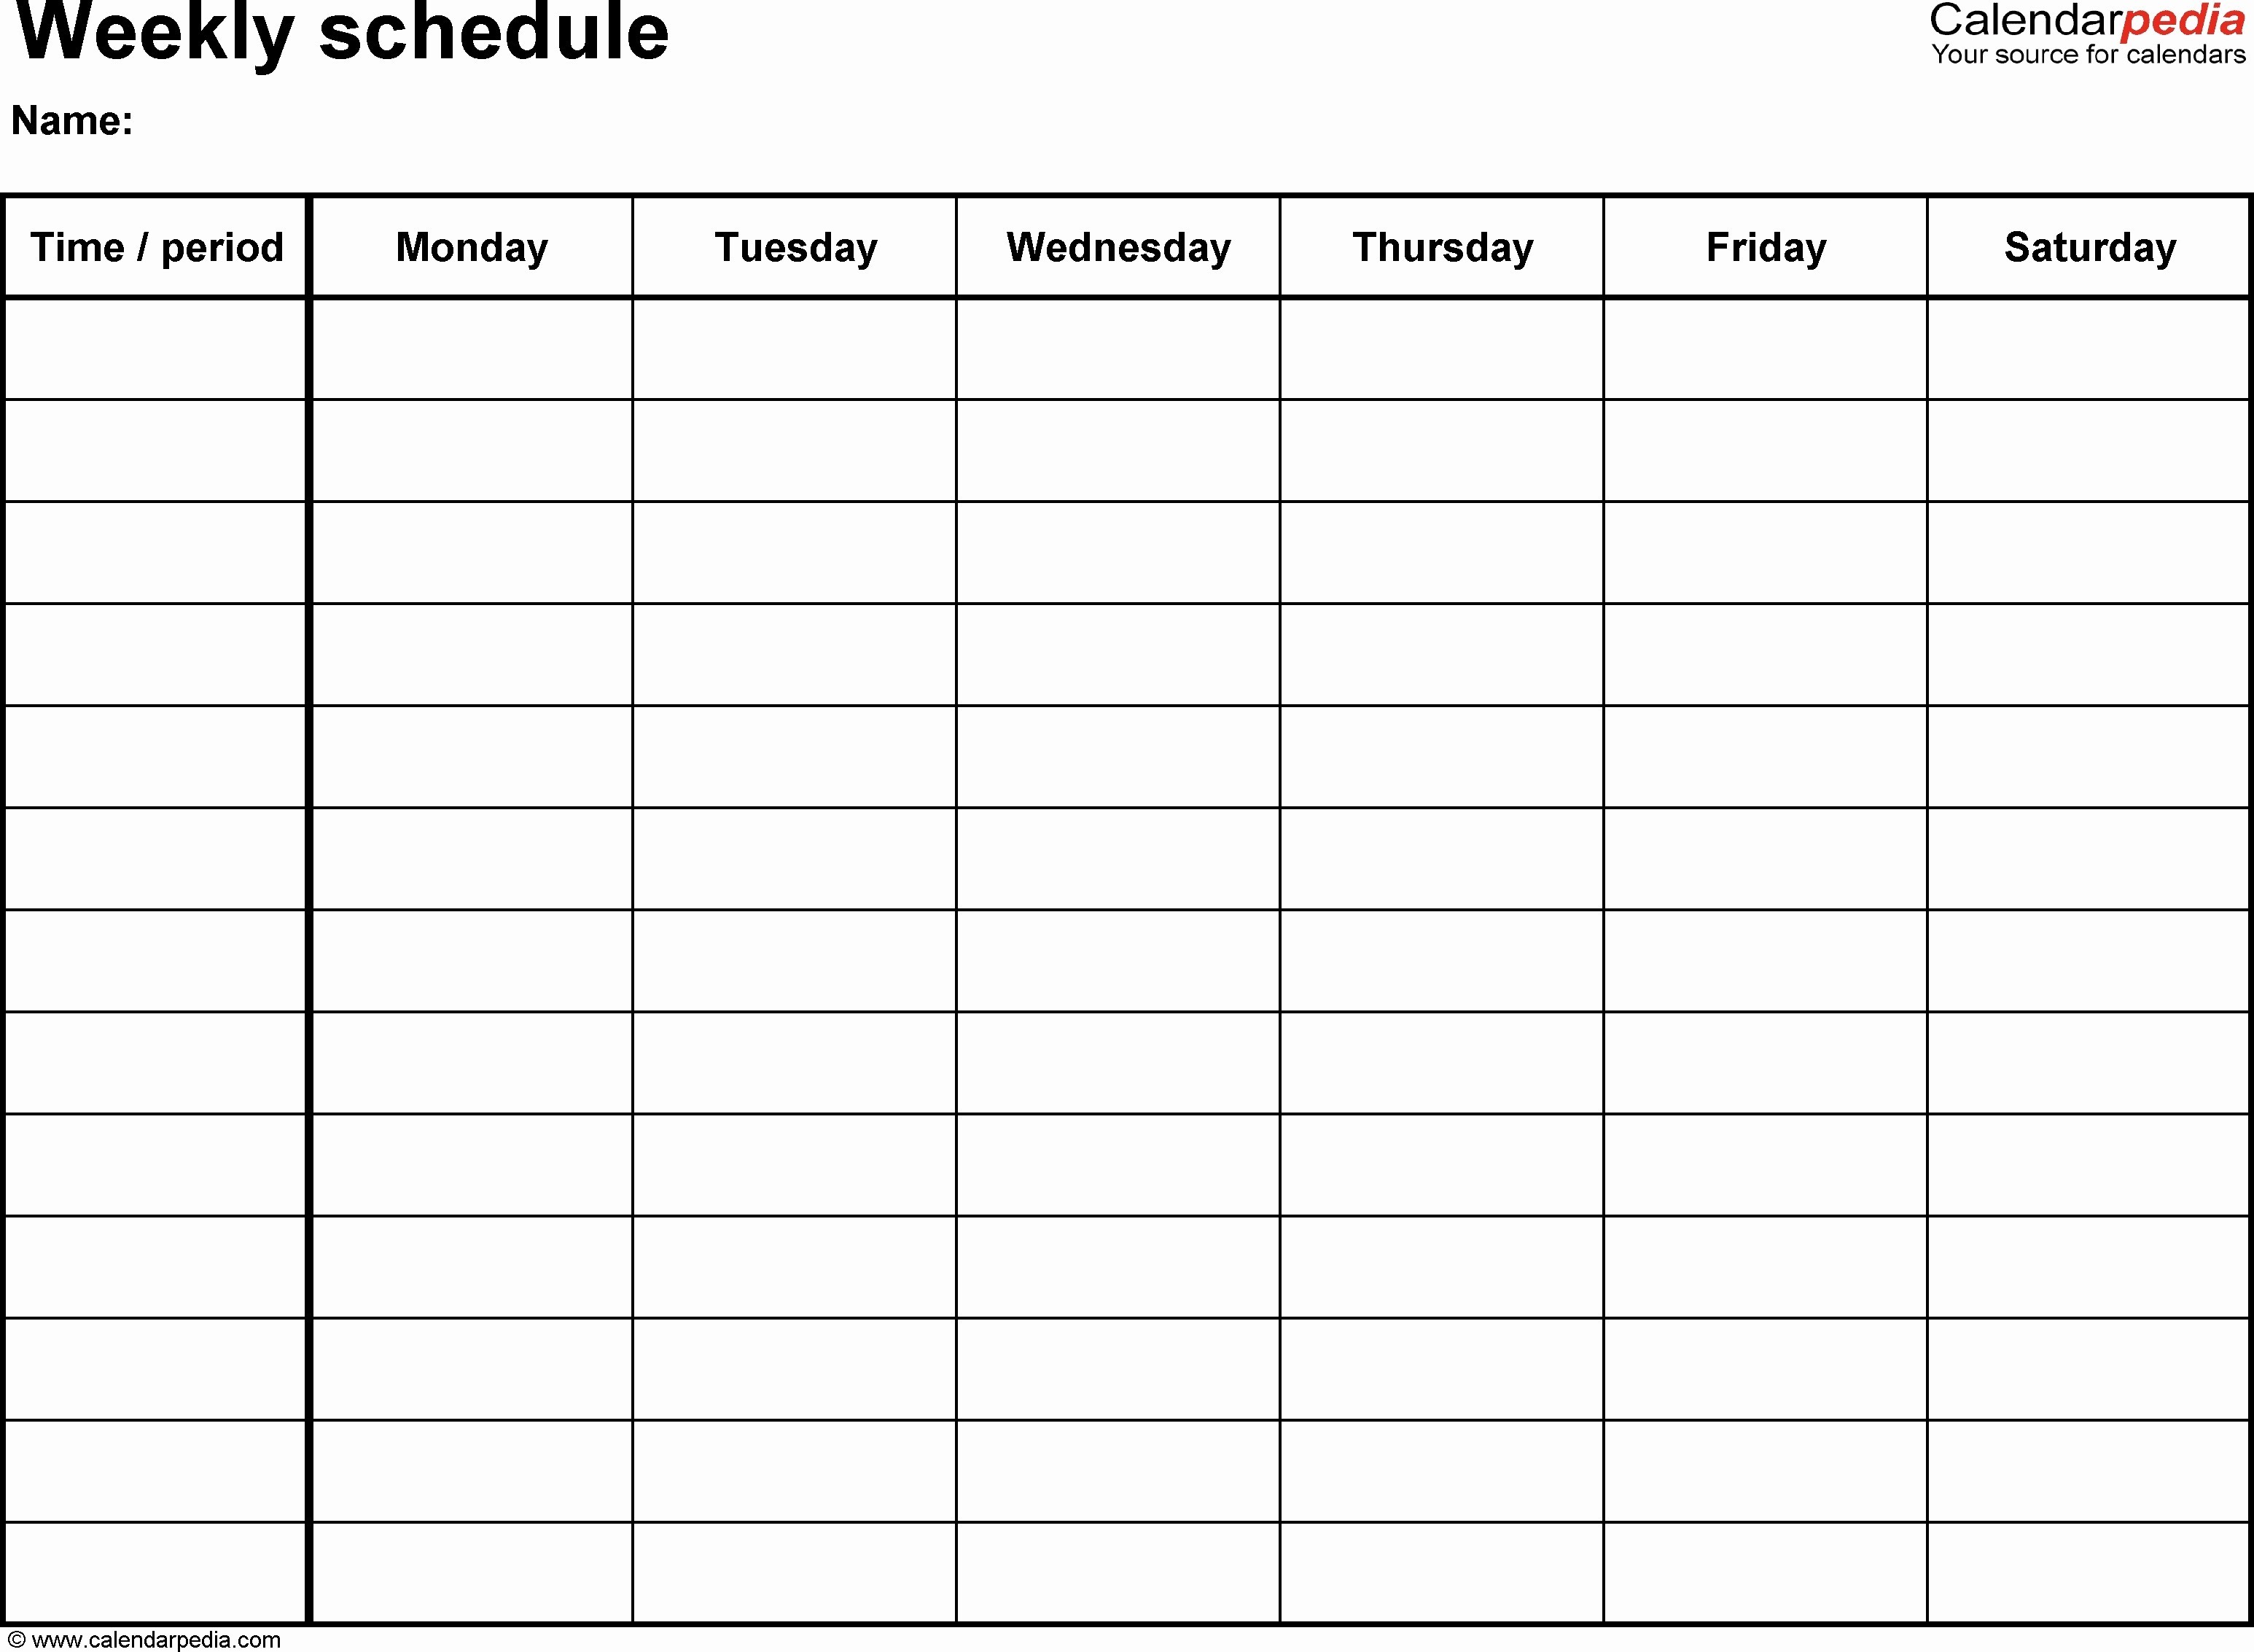 Employee Schedule Template Google Docs Austinroofing Us